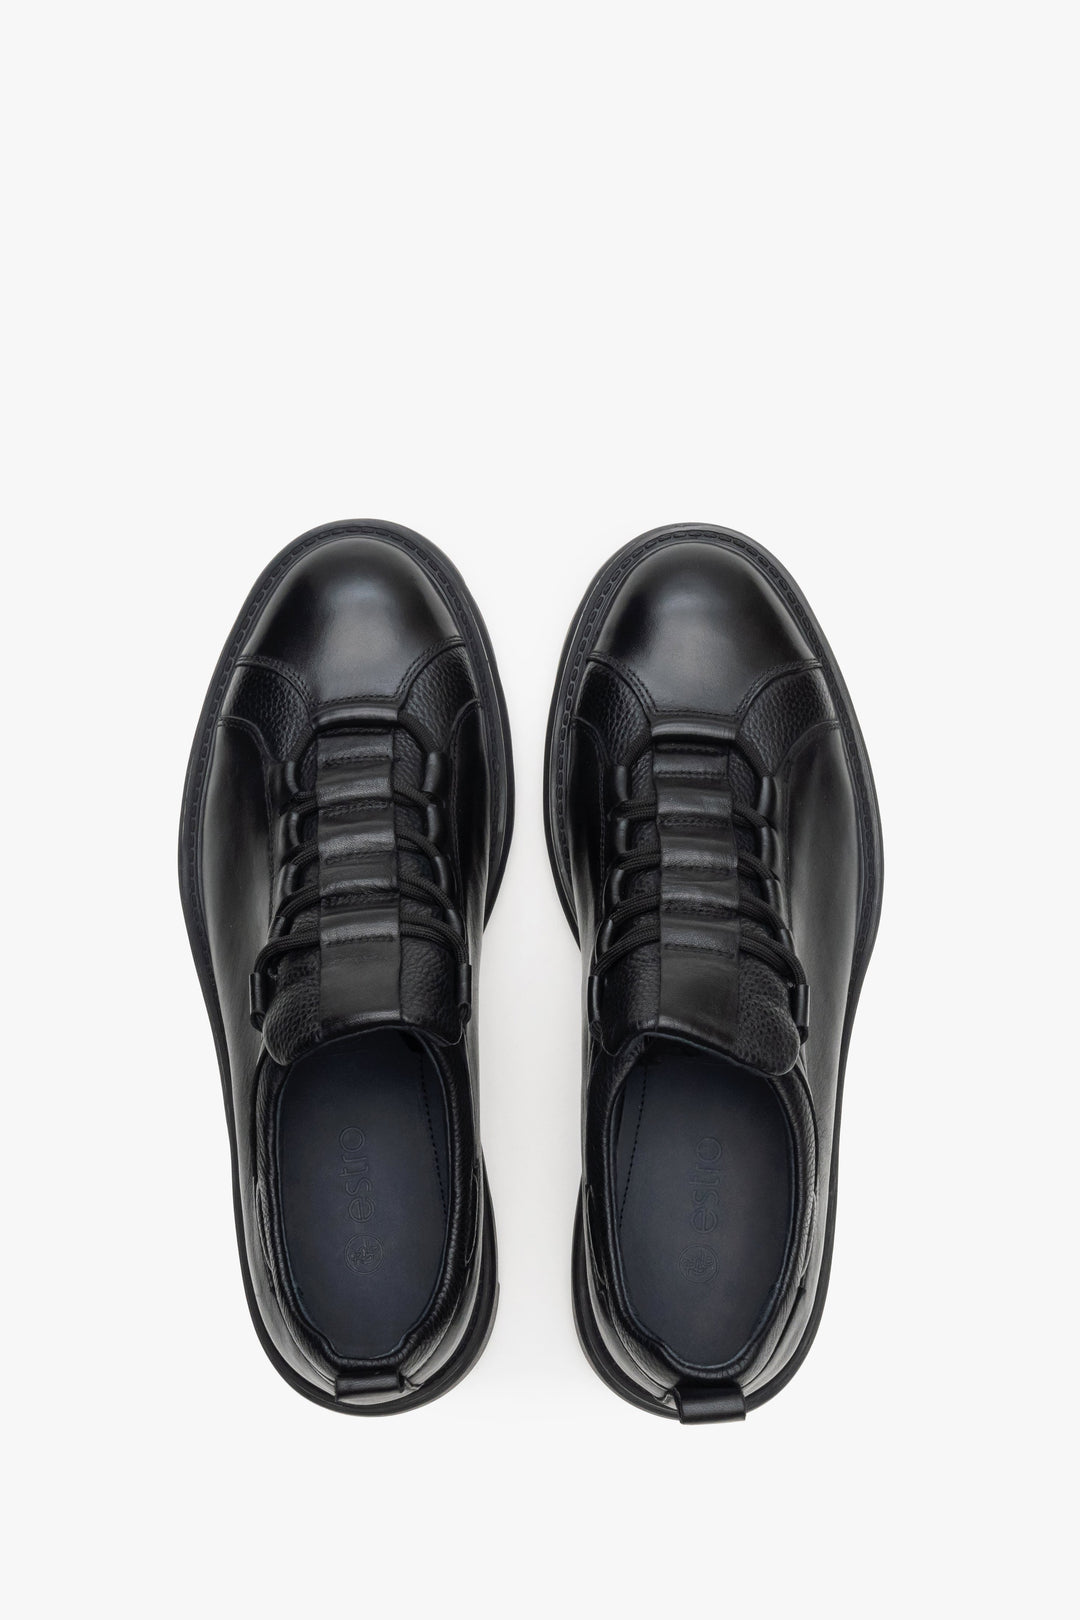 Men's black leather sneakers with elastic lacing - top view presentation of the model.